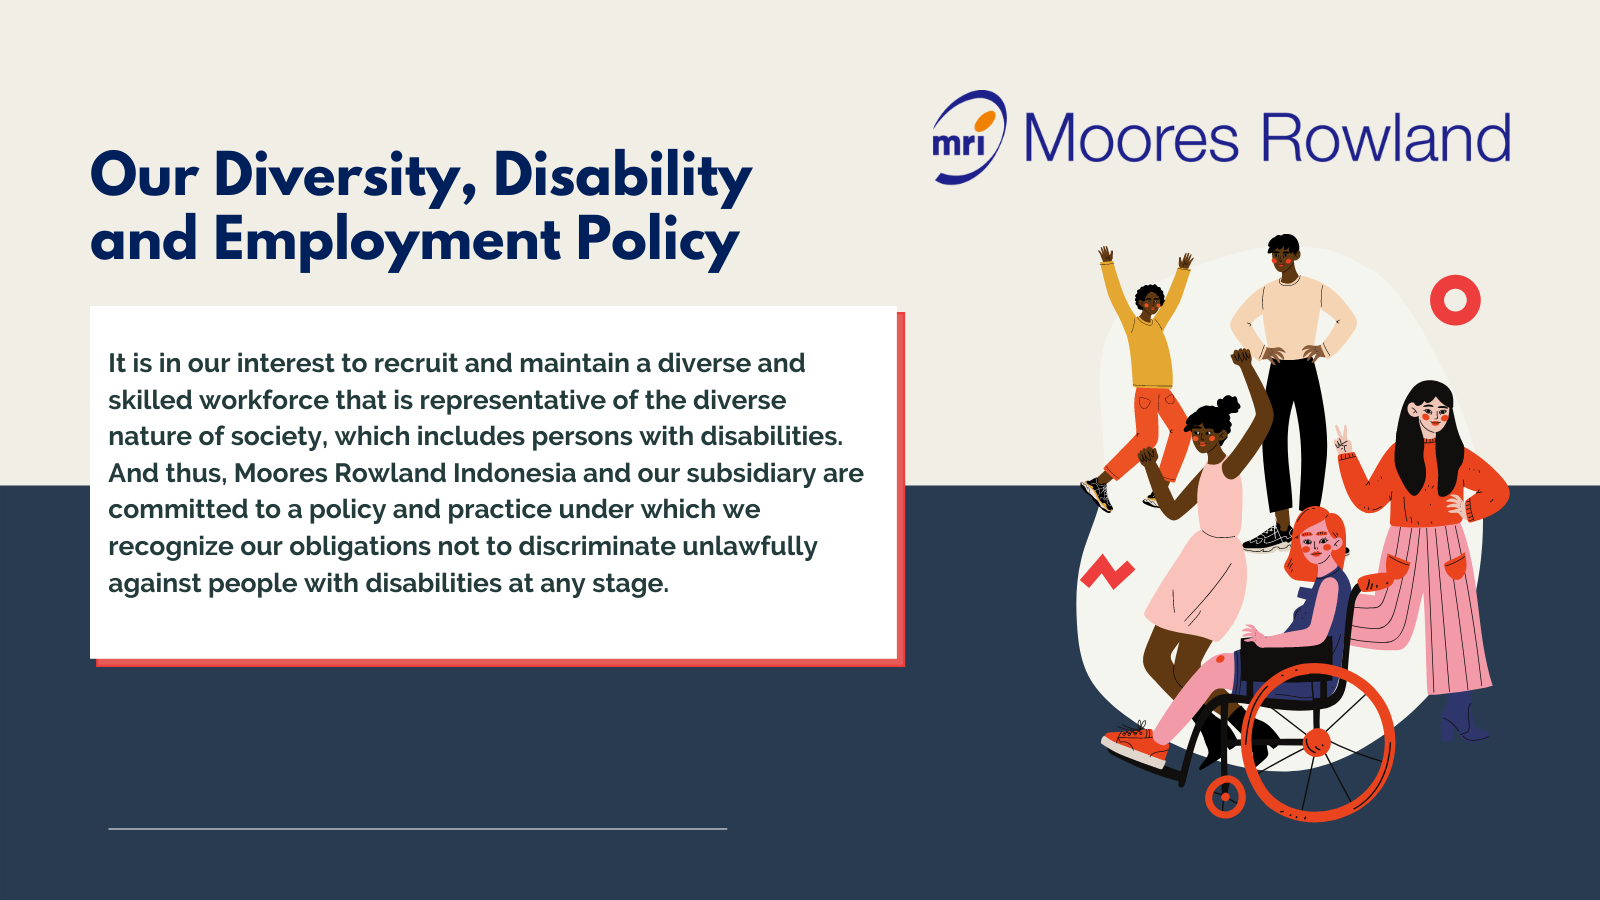 Diversity, Disability and Employment Policy in Moores Rowland